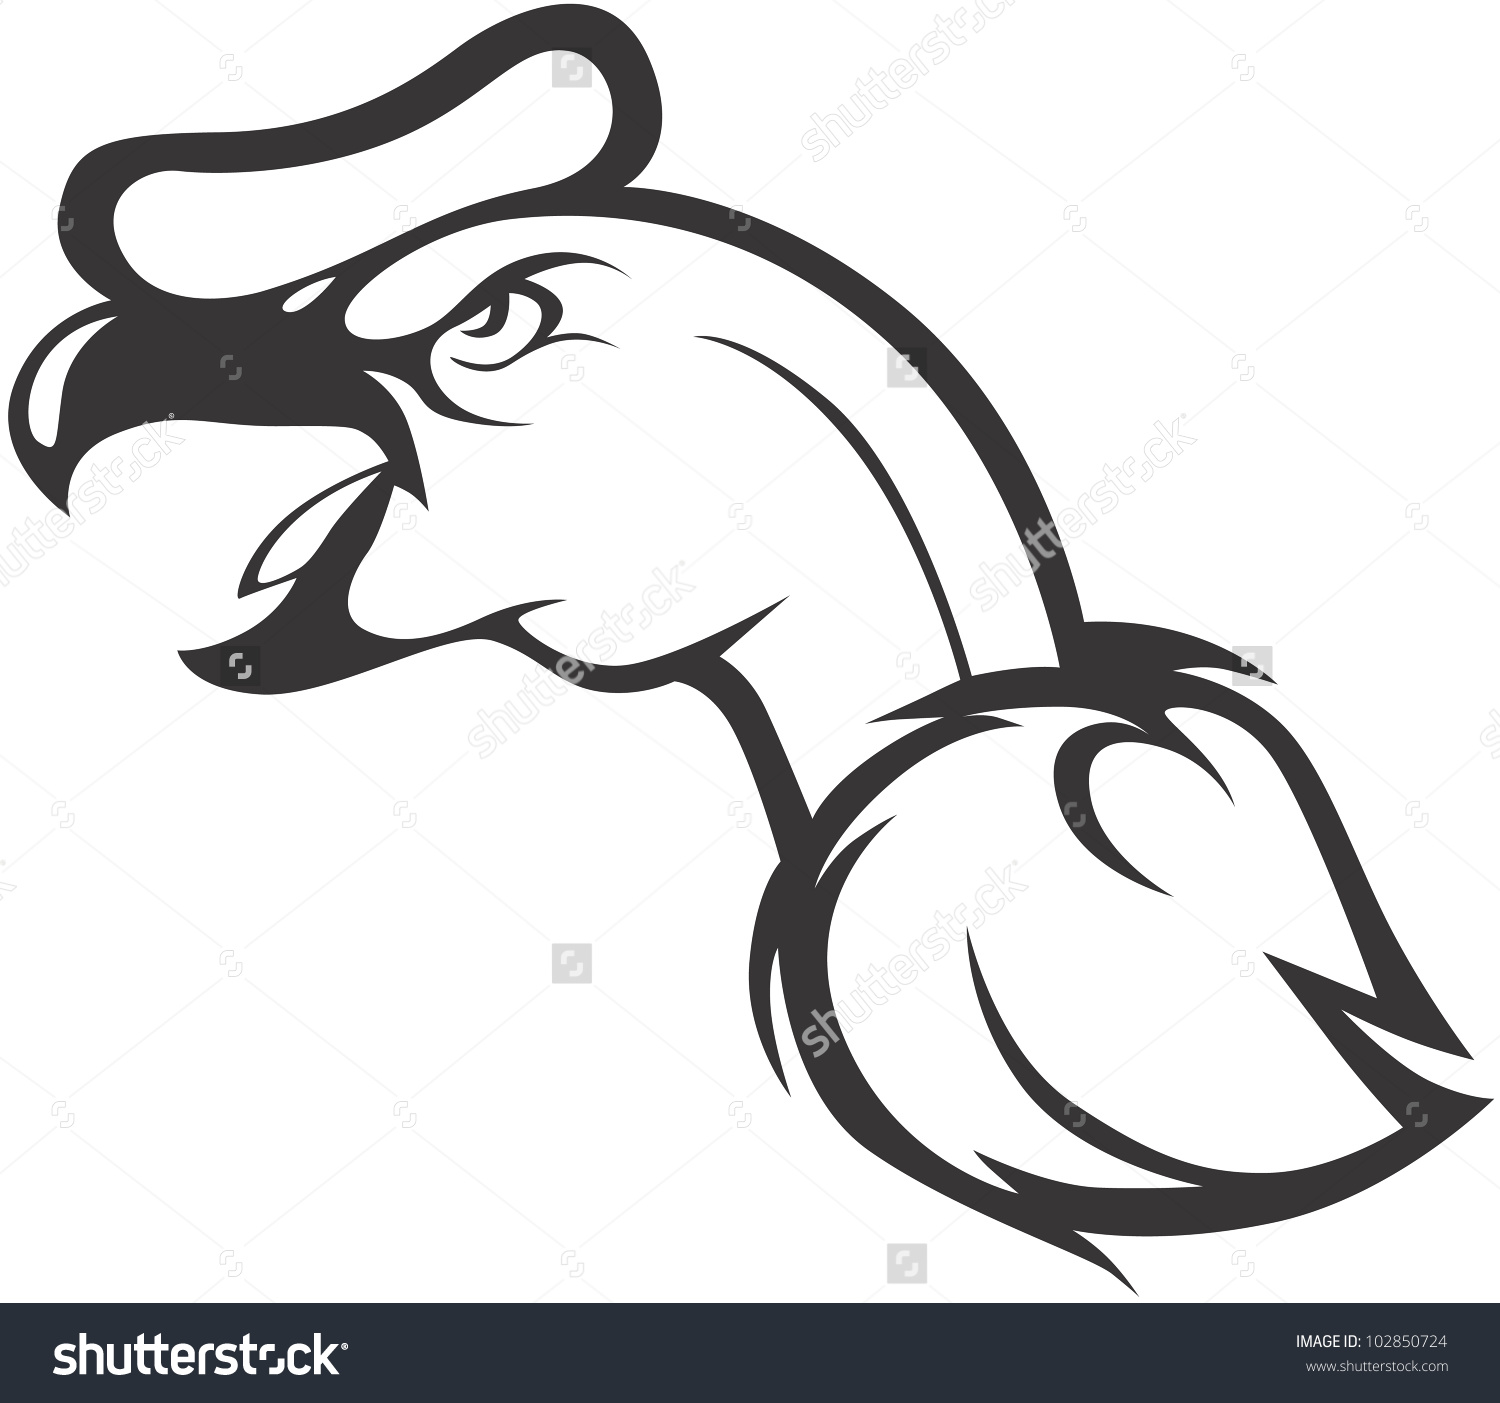 Andean Condor clipart #3, Download drawings